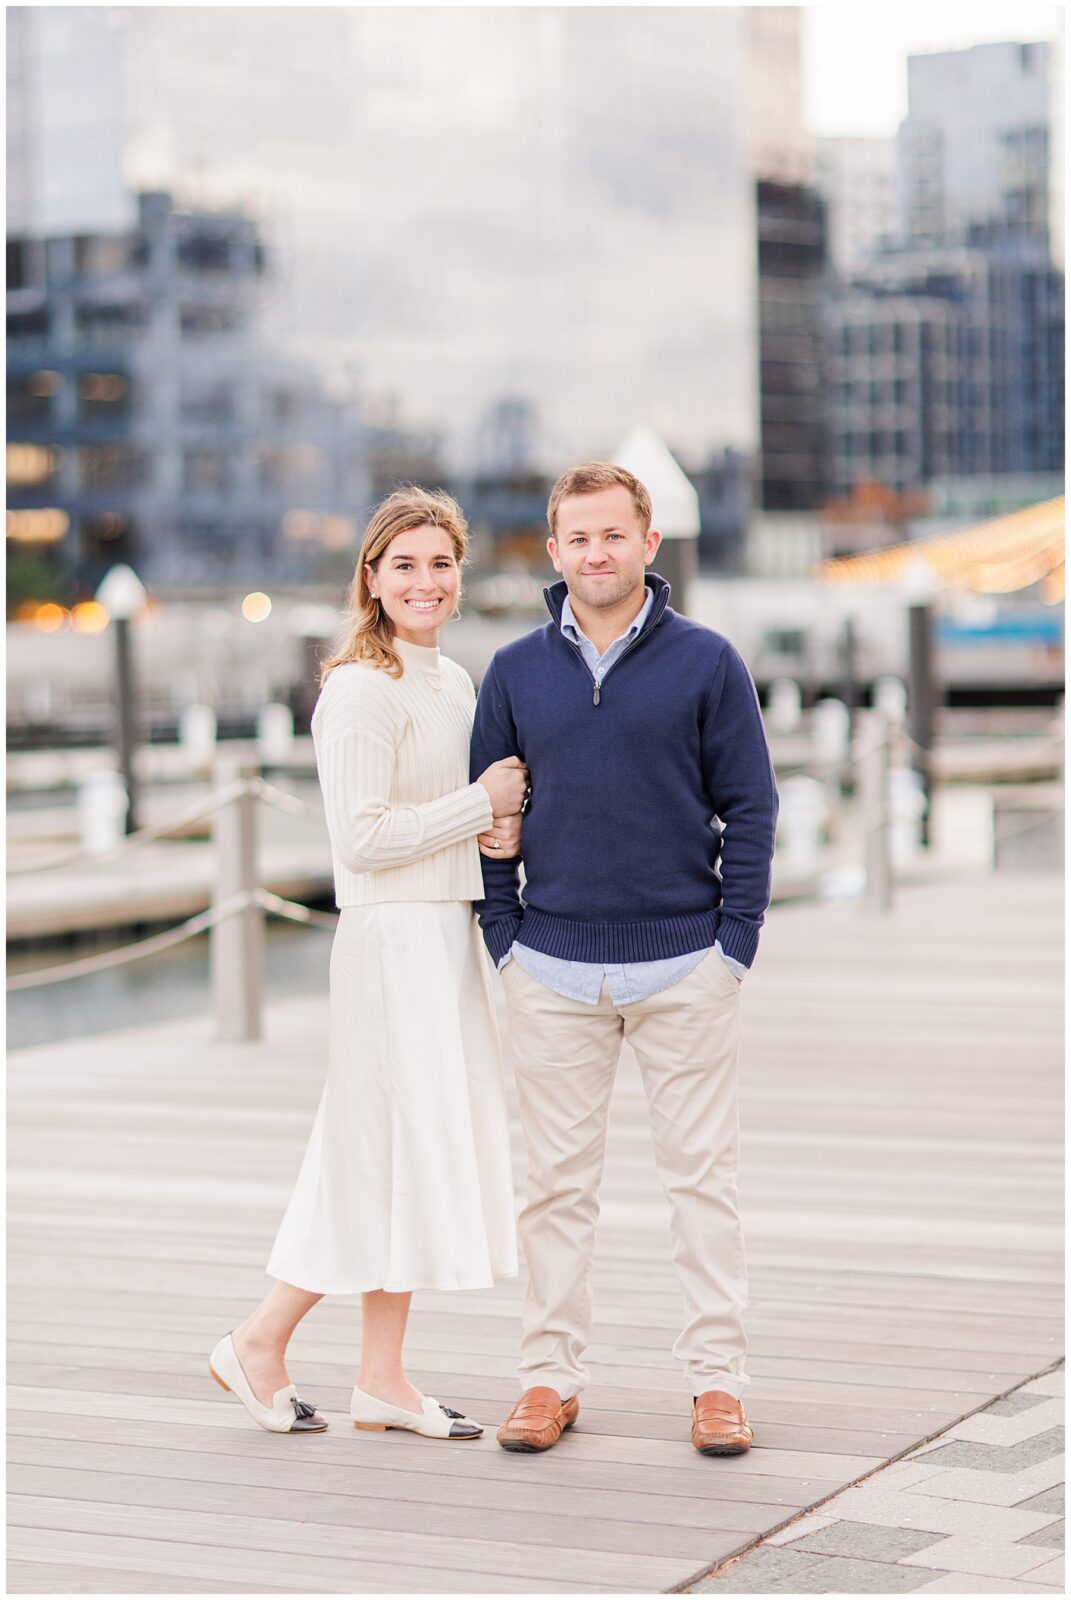 Woman hugging her fiancé during Boston Seaport engagement session.